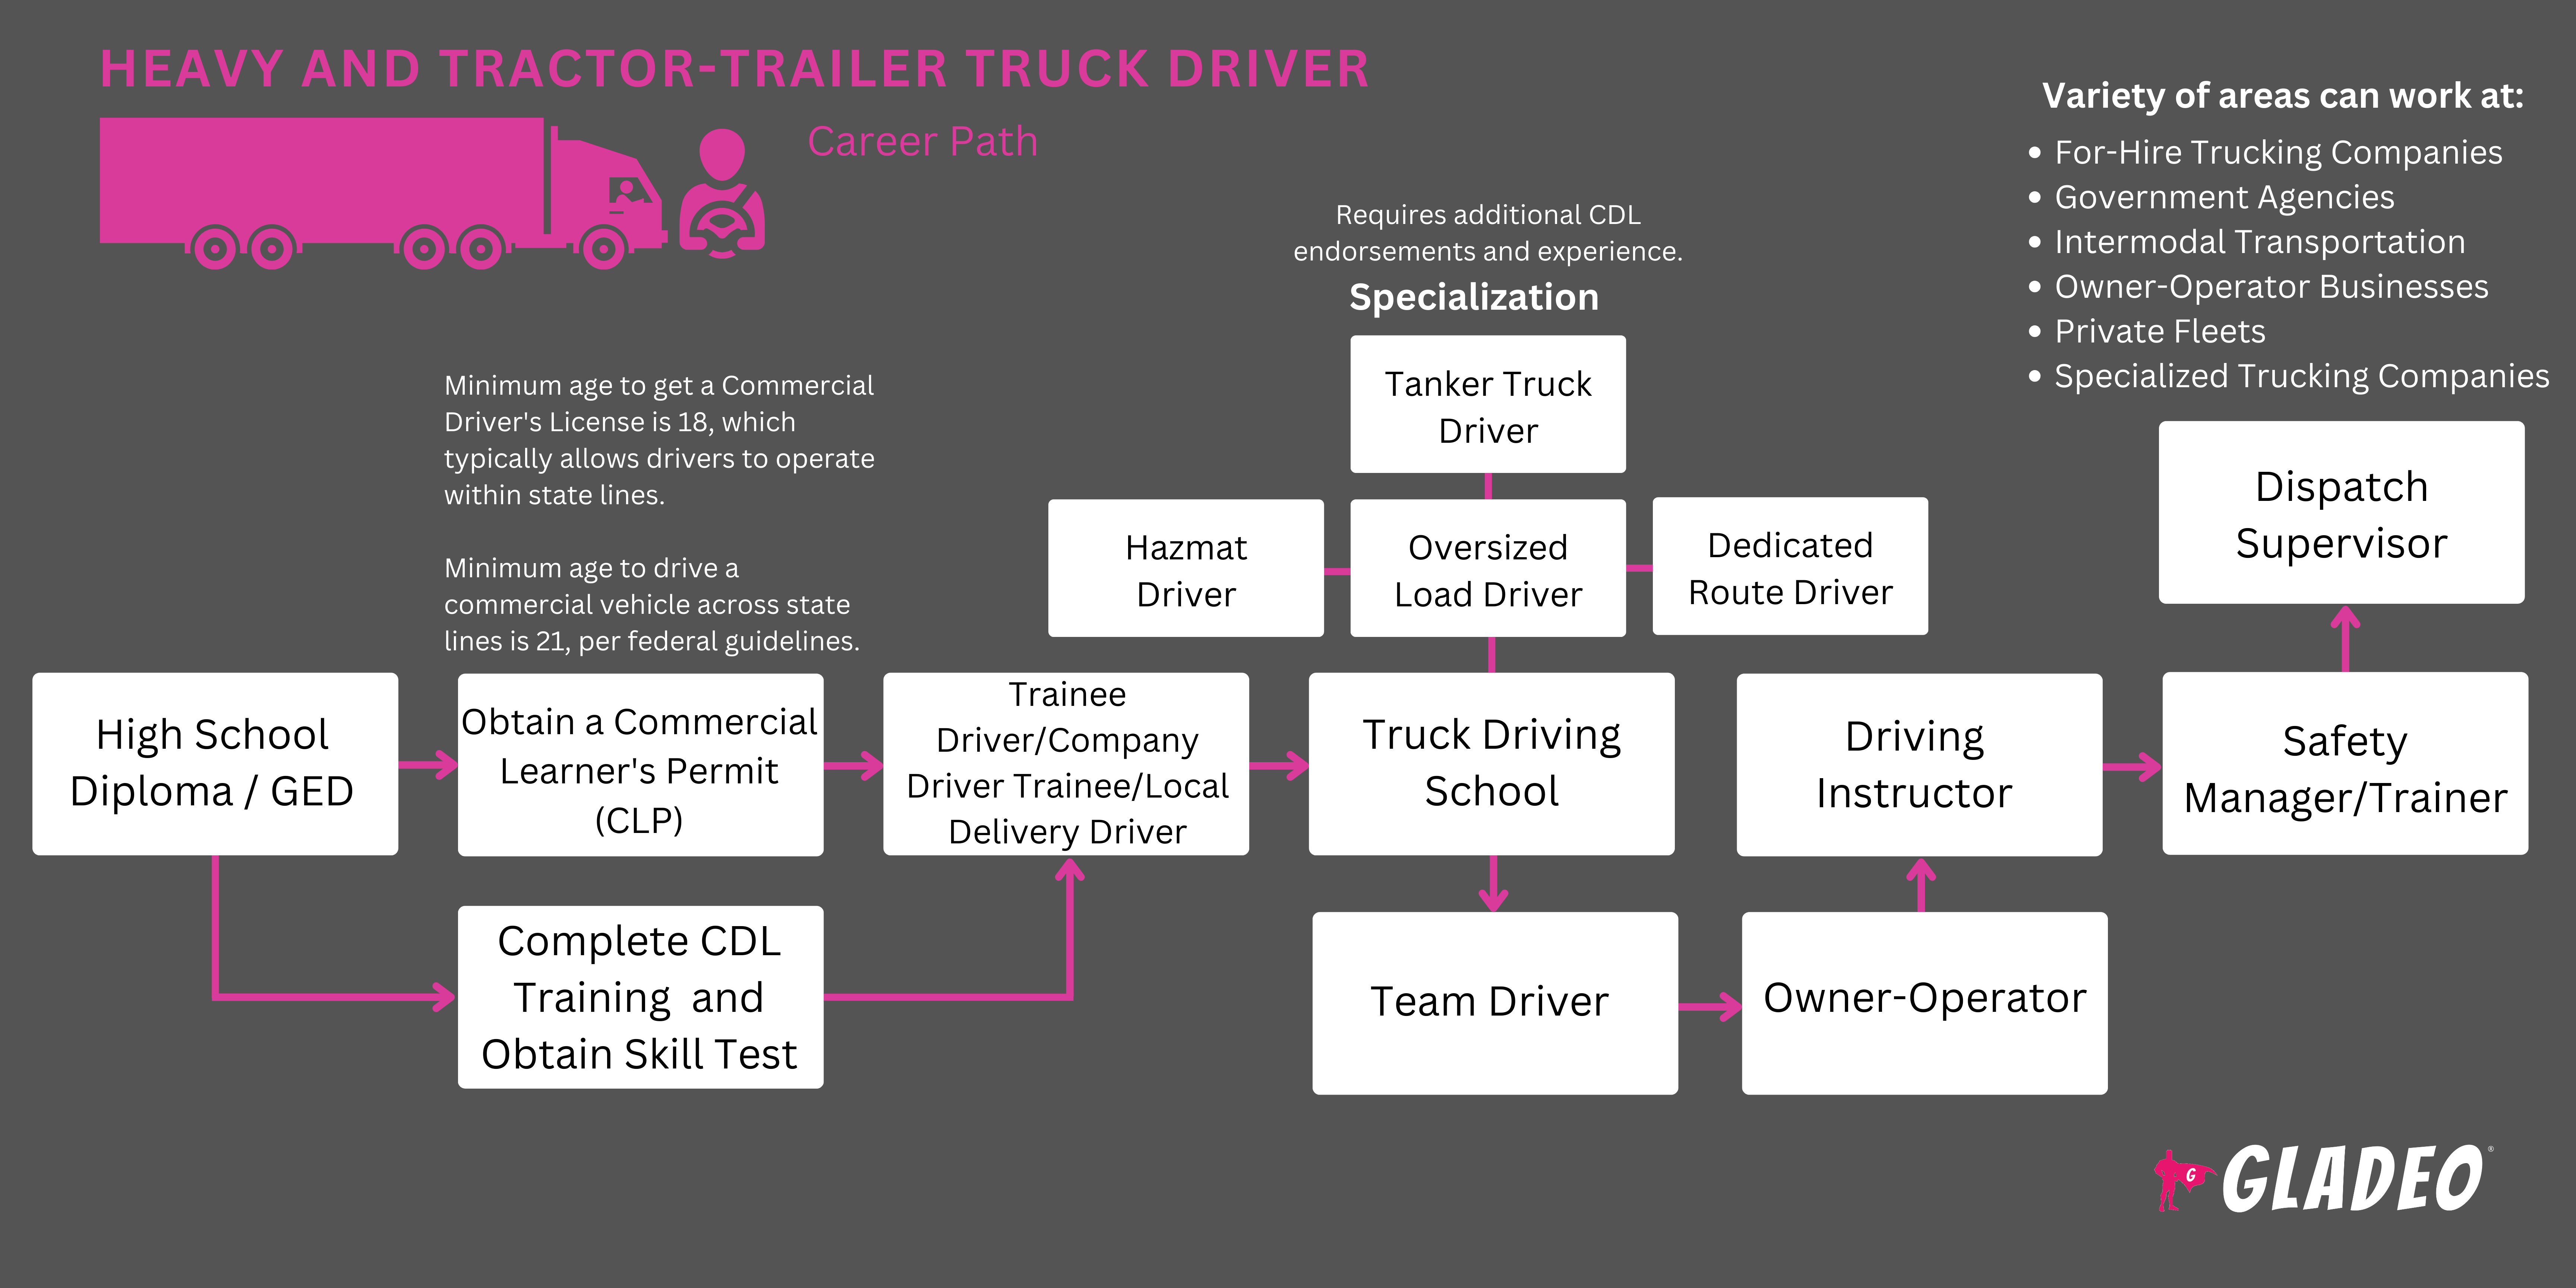 Heavy and Tractor-Trailer Truck Driver Roadmap